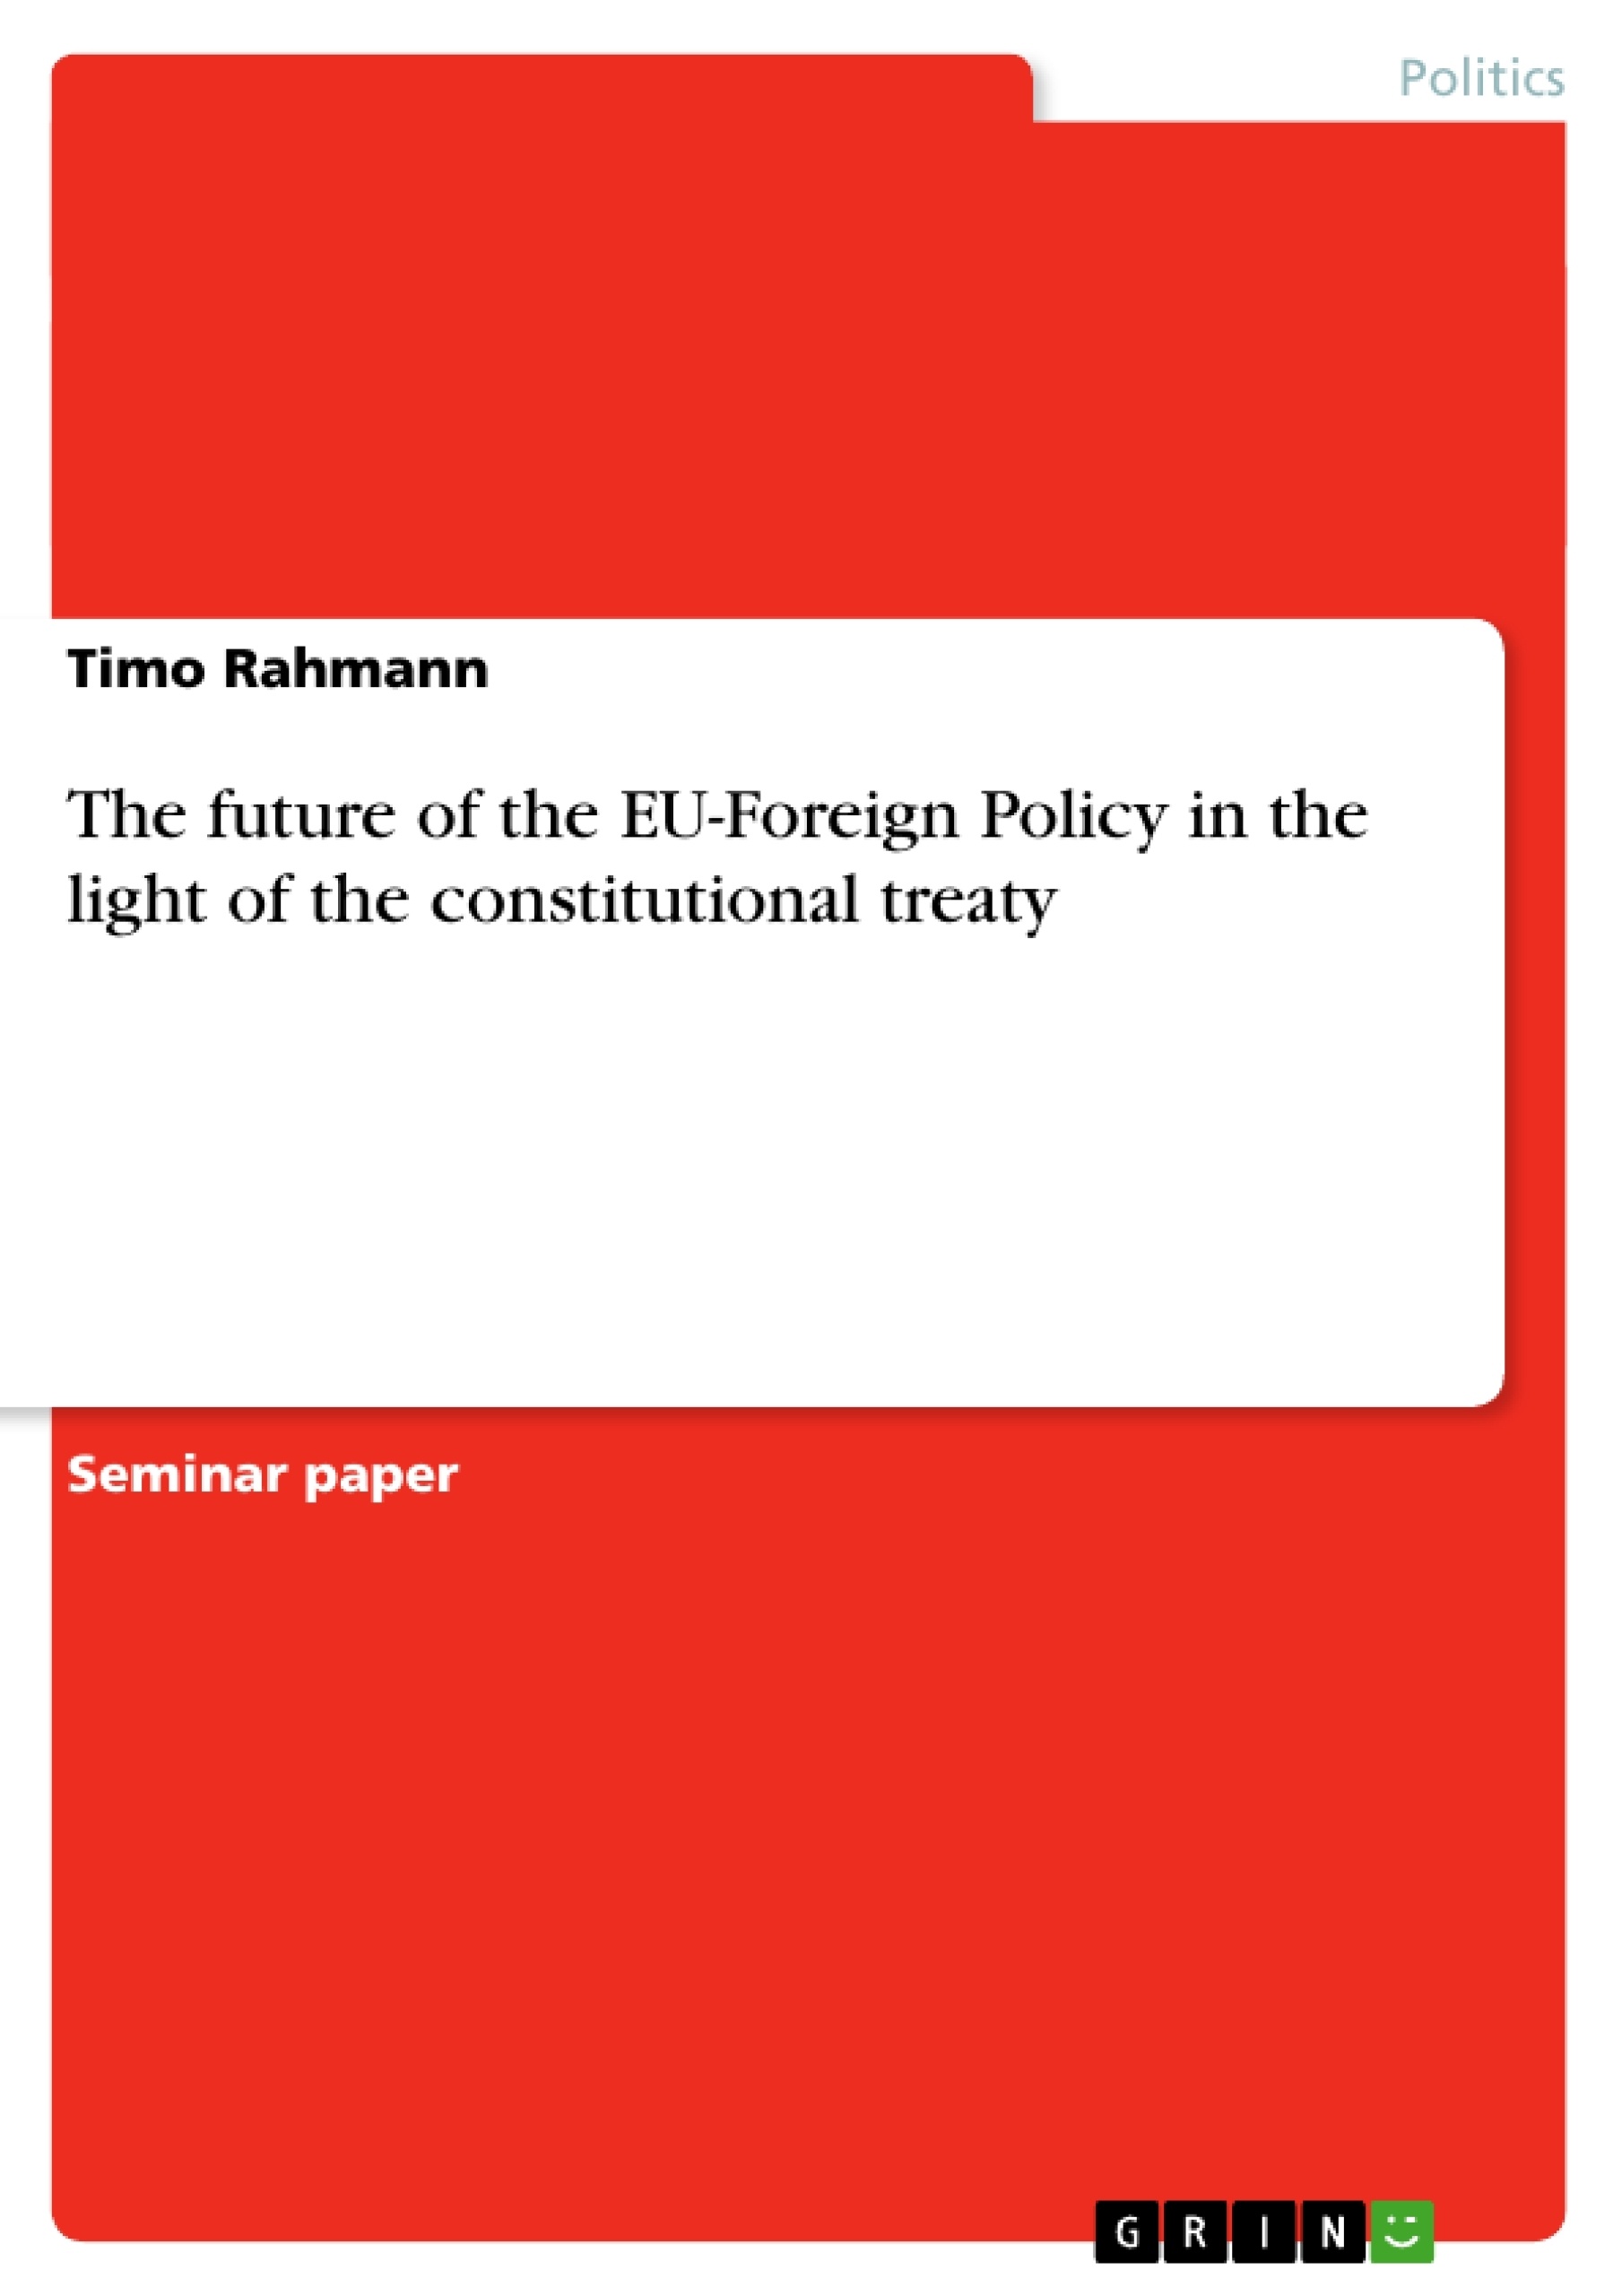 Title: The future of the EU-Foreign Policy in the light of the constitutional treaty